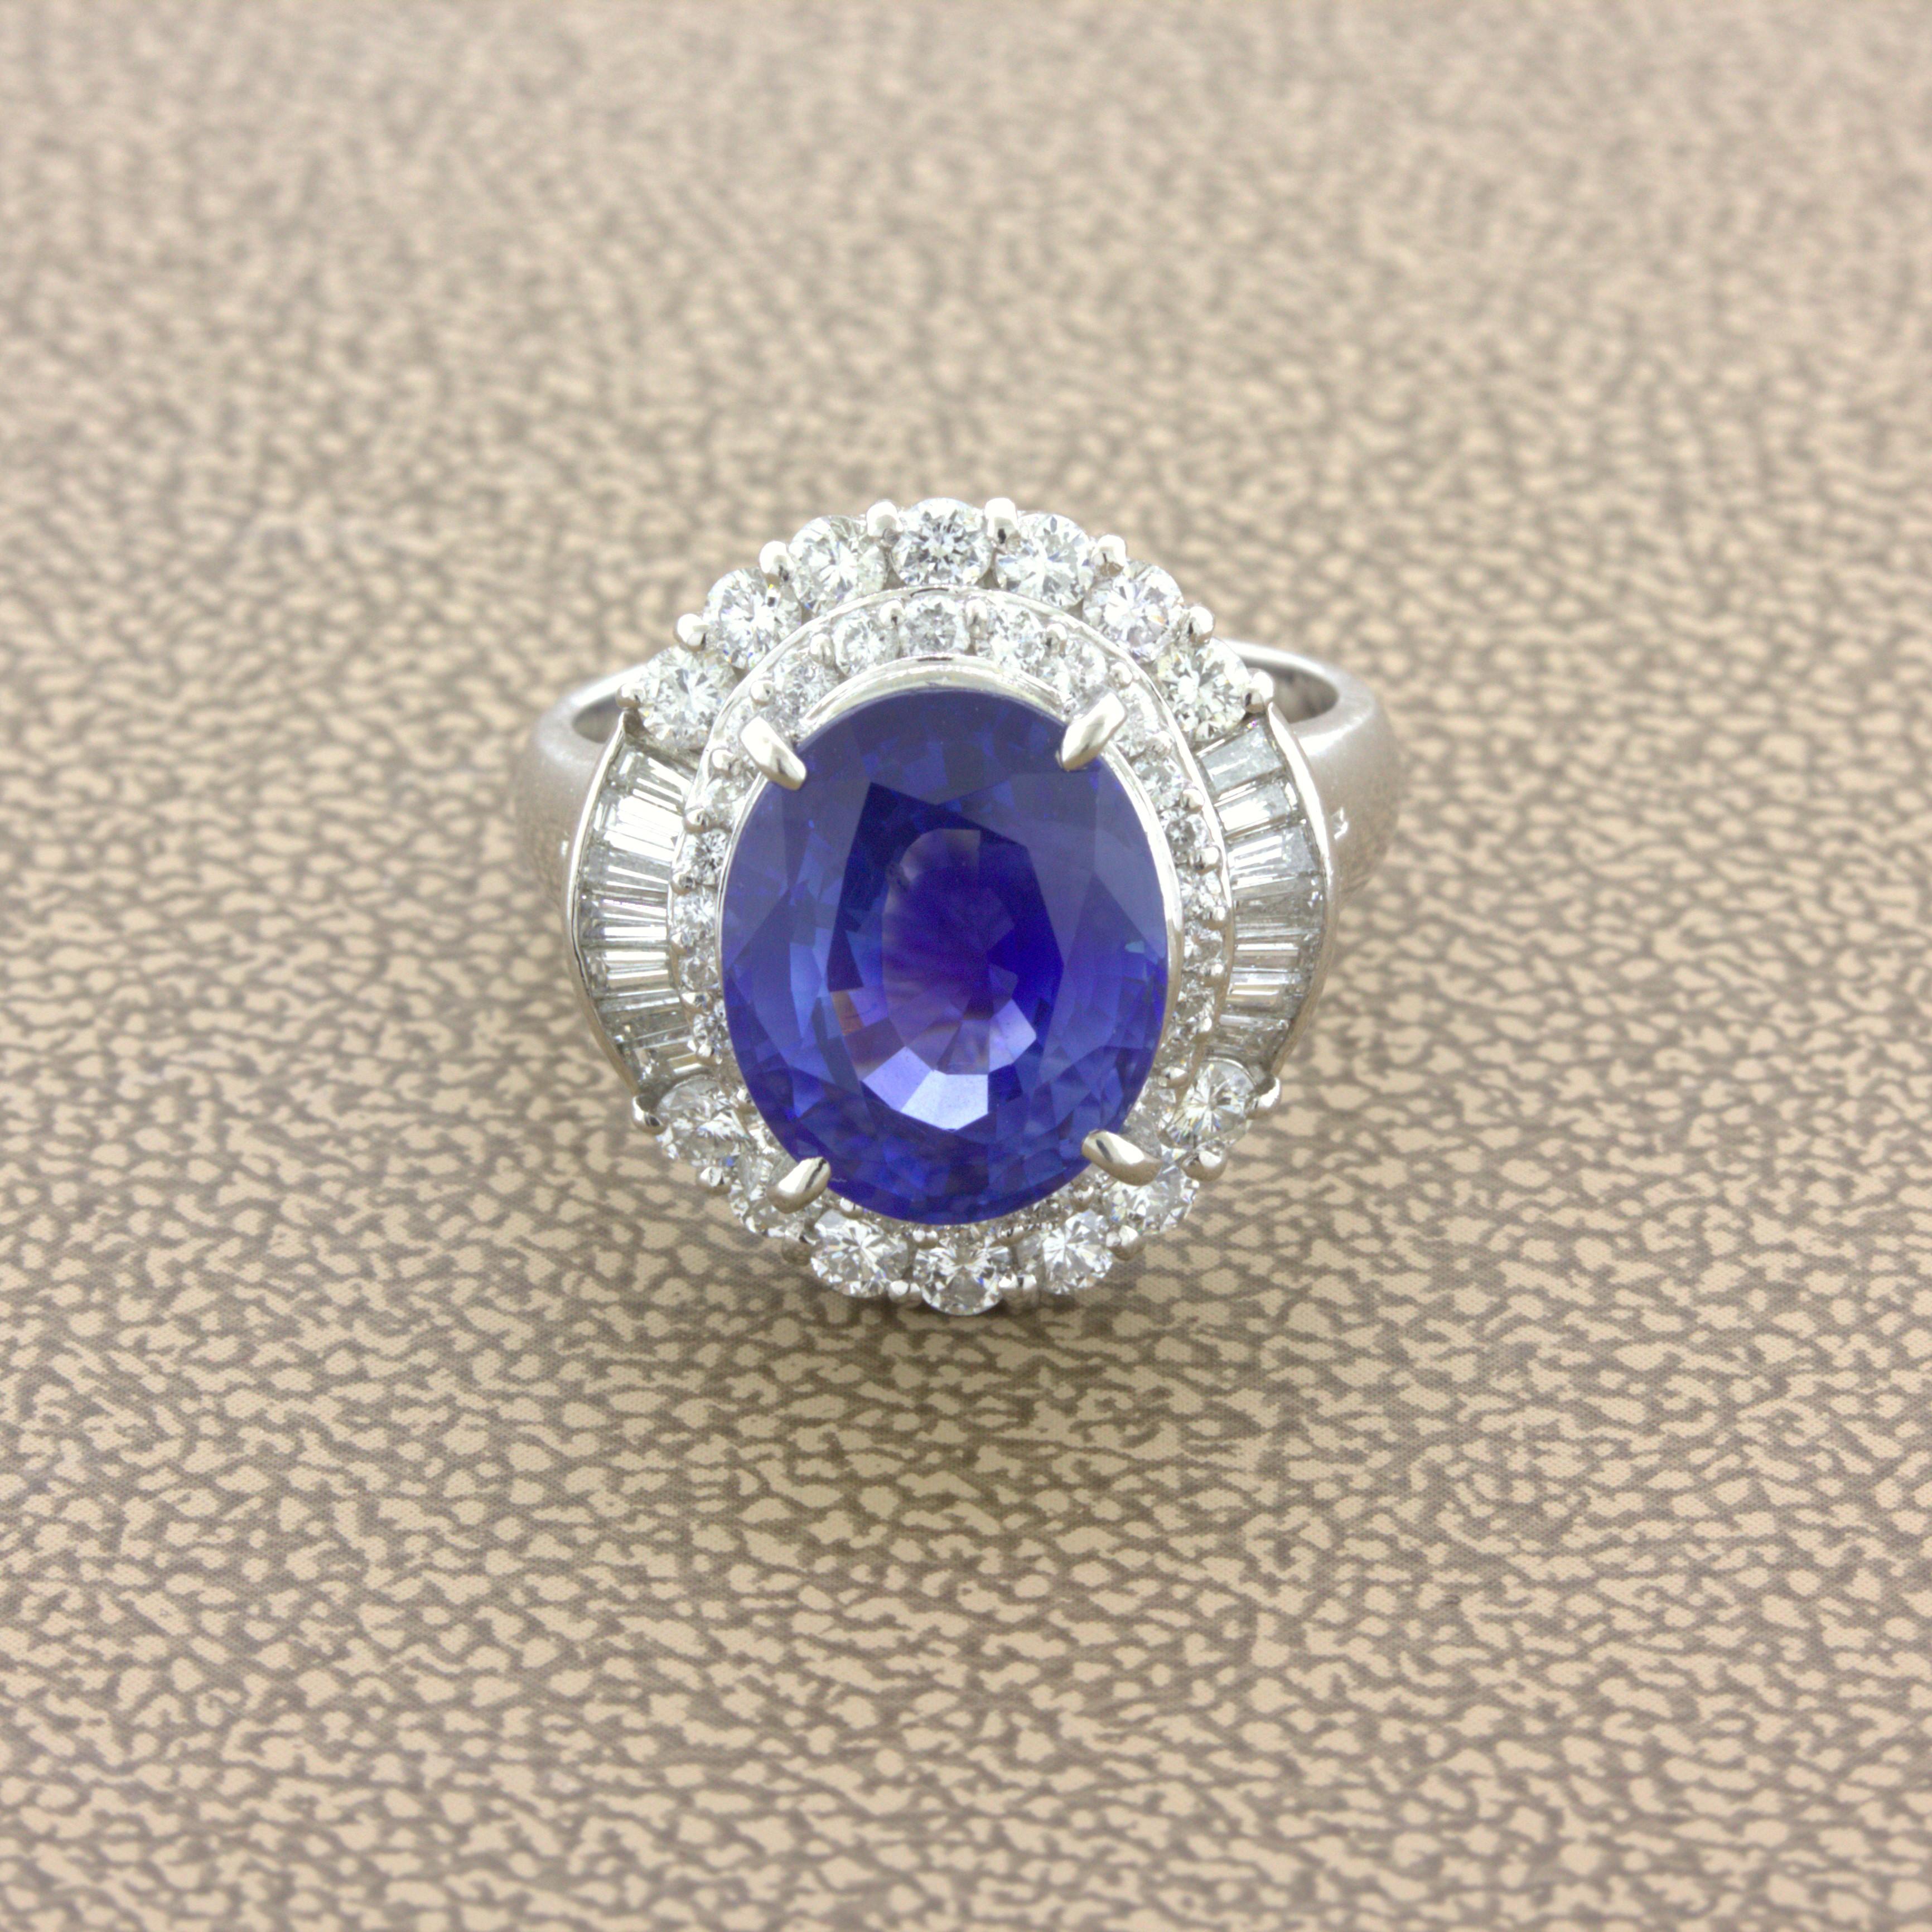 Dive into this 5.07 carat pool of brilliant blue sapphire! The 5 carat gem sapphire has a rich pure blue color that shines brightly in the light. It is complemented by 1.05 carats of baguette and round brilliant-cut diamonds set in a stylish pattern